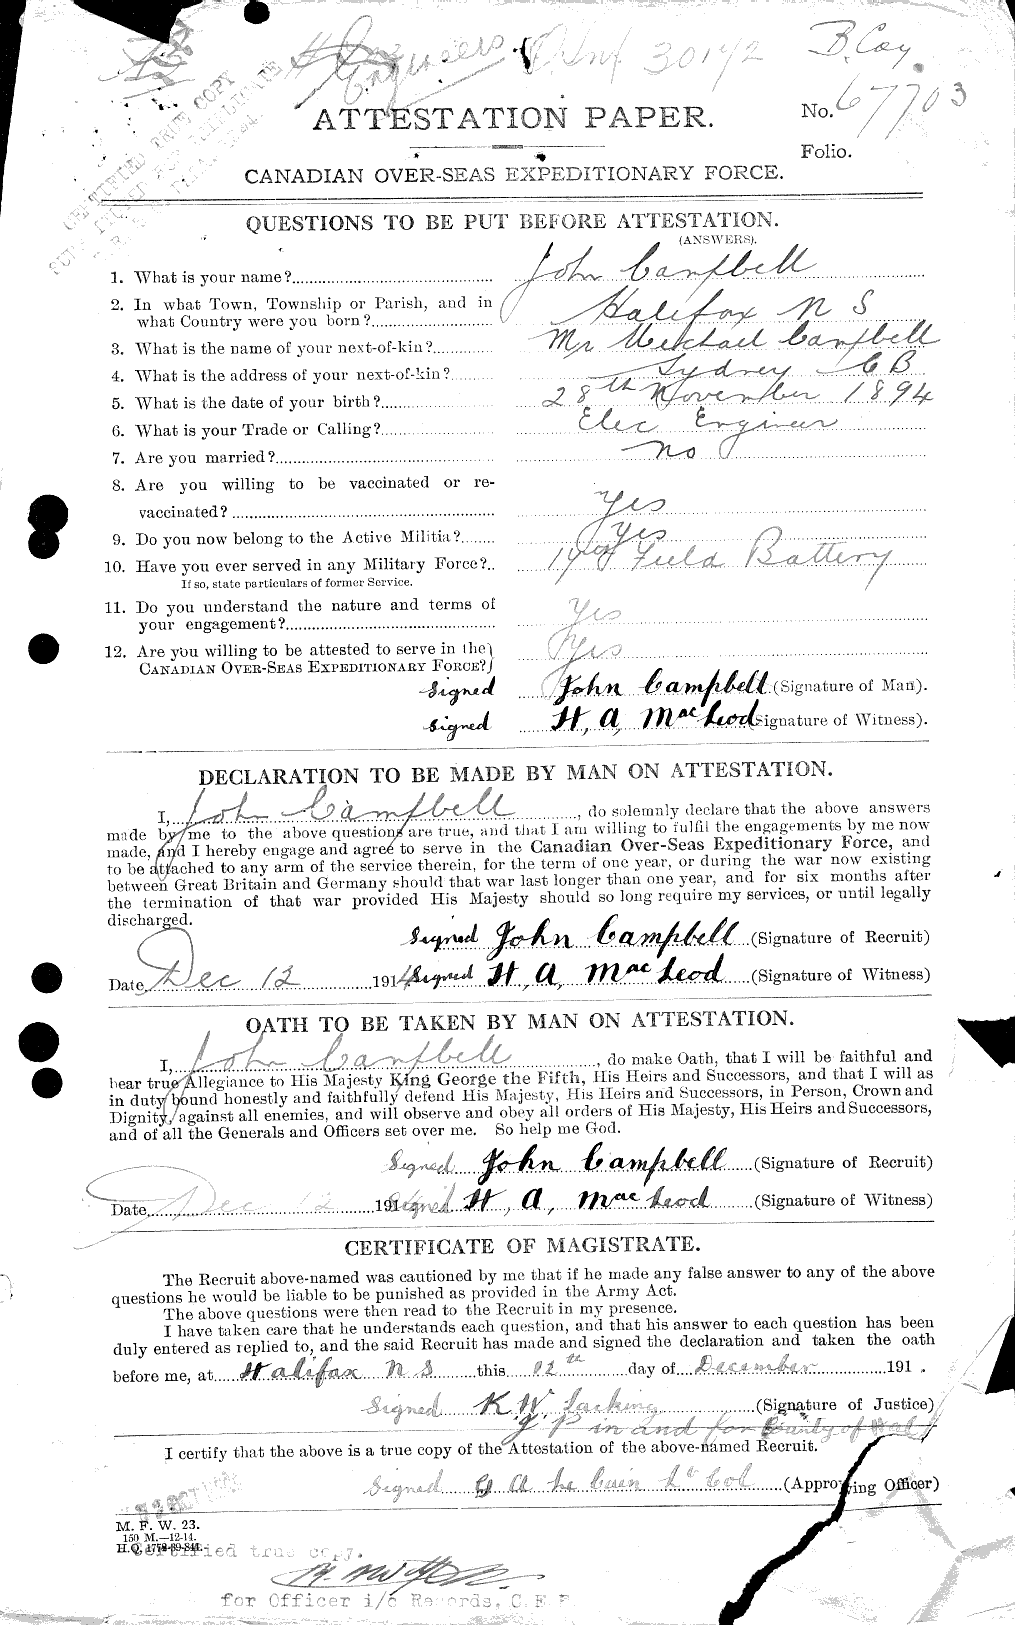 Personnel Records of the First World War - CEF 006805a